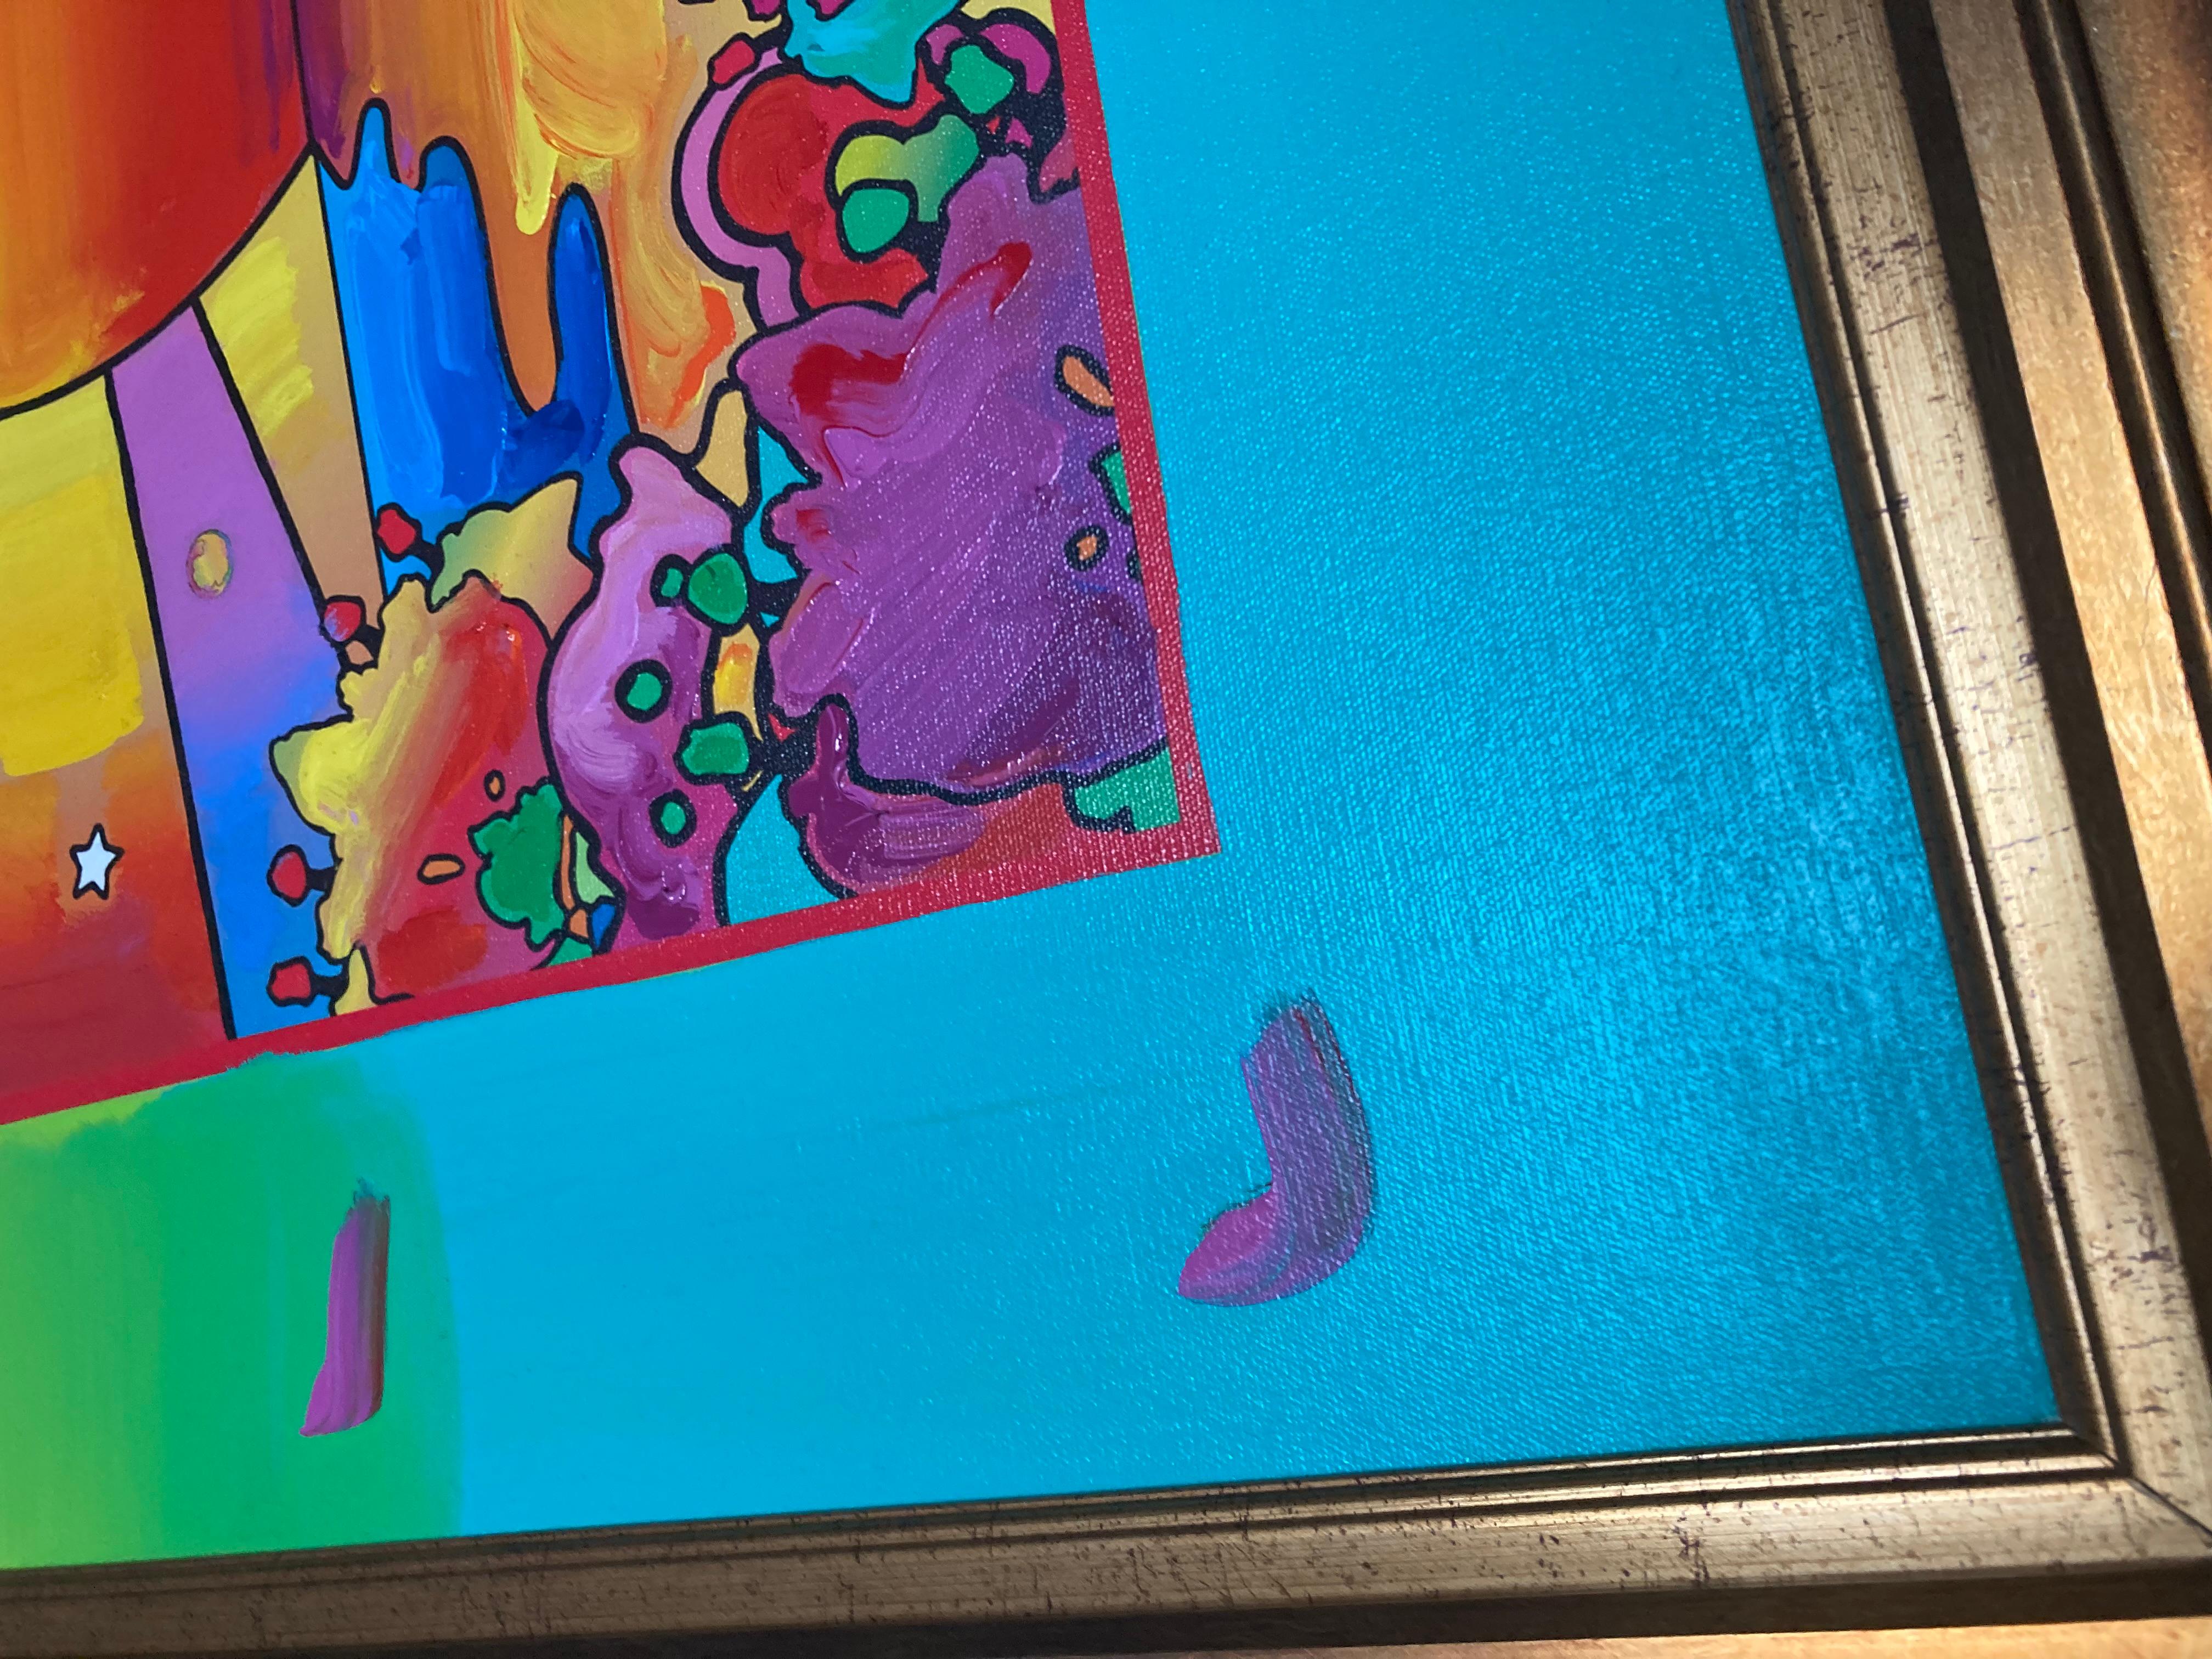 Peter Max original mixed media on canvas “Sunrise 2000”. In great condition rare piece was made in 2008. Purchase price $35000 and his art has gone up since. Painting came from Park west gallery and registration code is in the back along with the